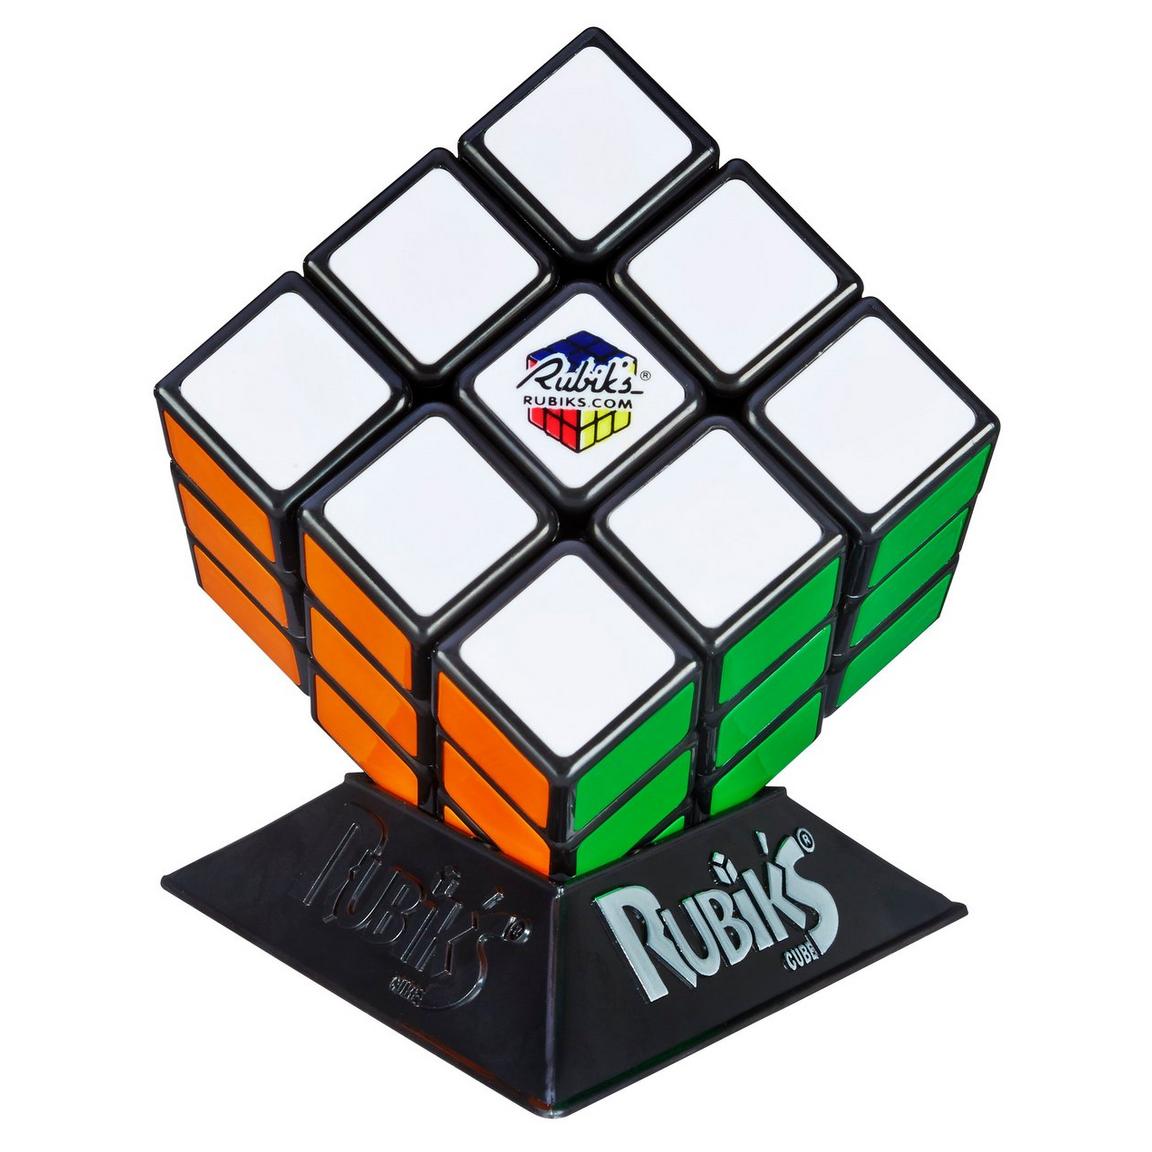 GameStop has Hasbro Rubik's Cube 3x3 Puzzle Game on sale for $...